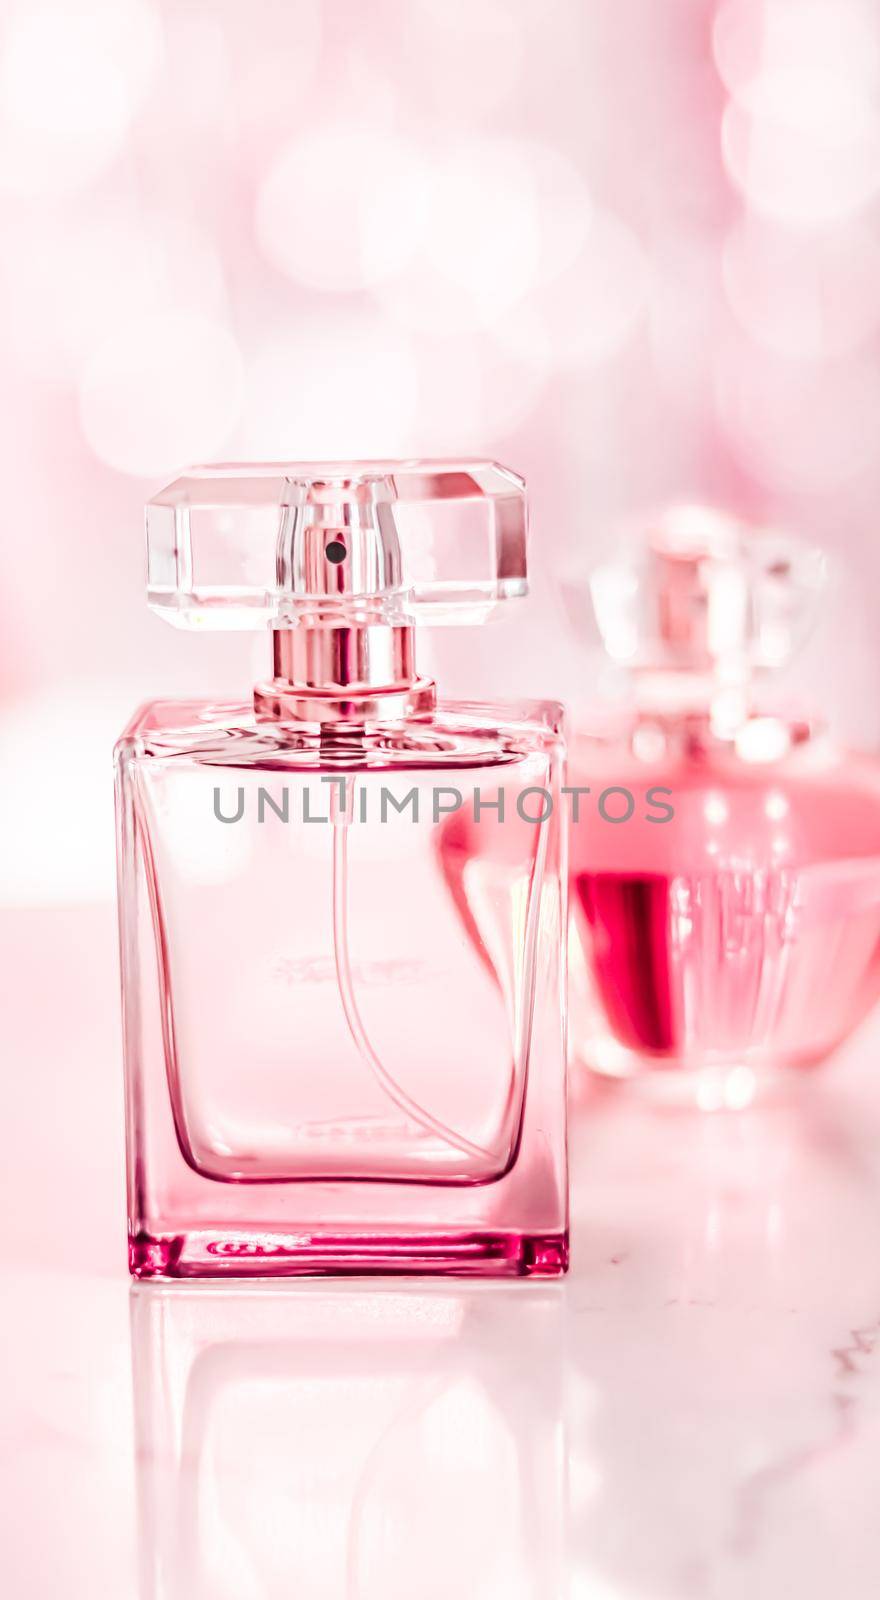 Perfume bottles on glamour background, floral feminine scent, fragrance and eau de parfum as luxury holiday gift, cosmetic and beauty brand present concept